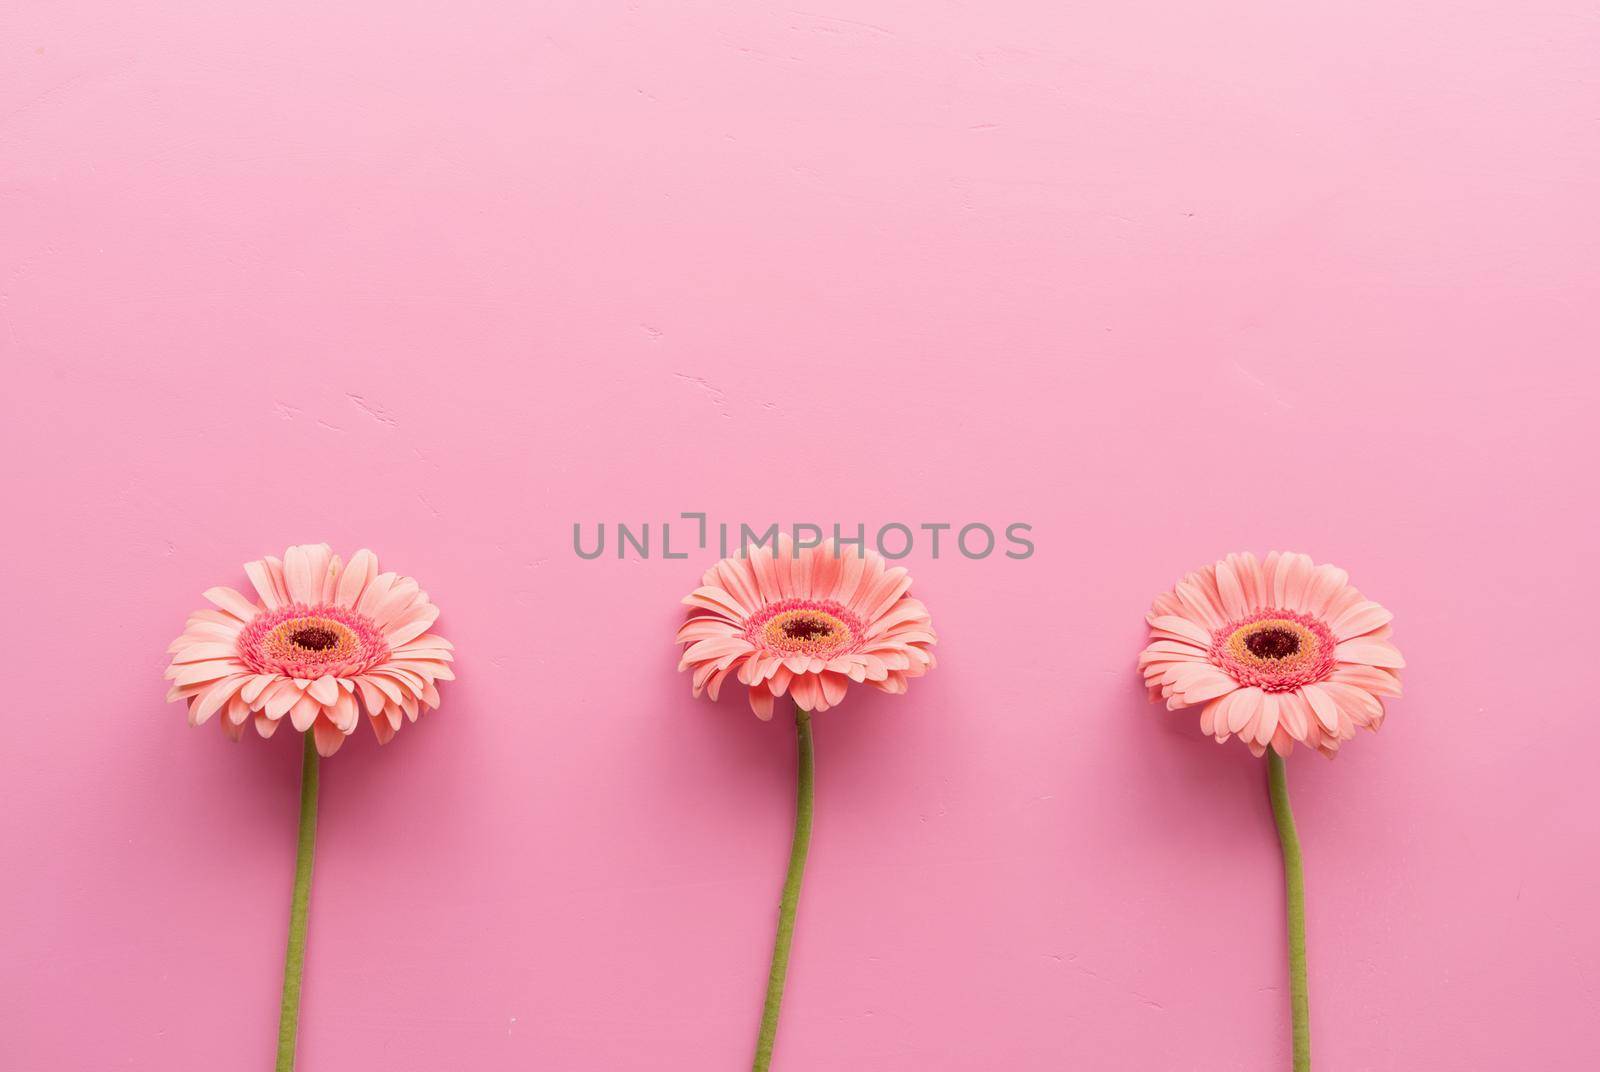 Three gerbera daisies in a raw on a pink background by Desperada